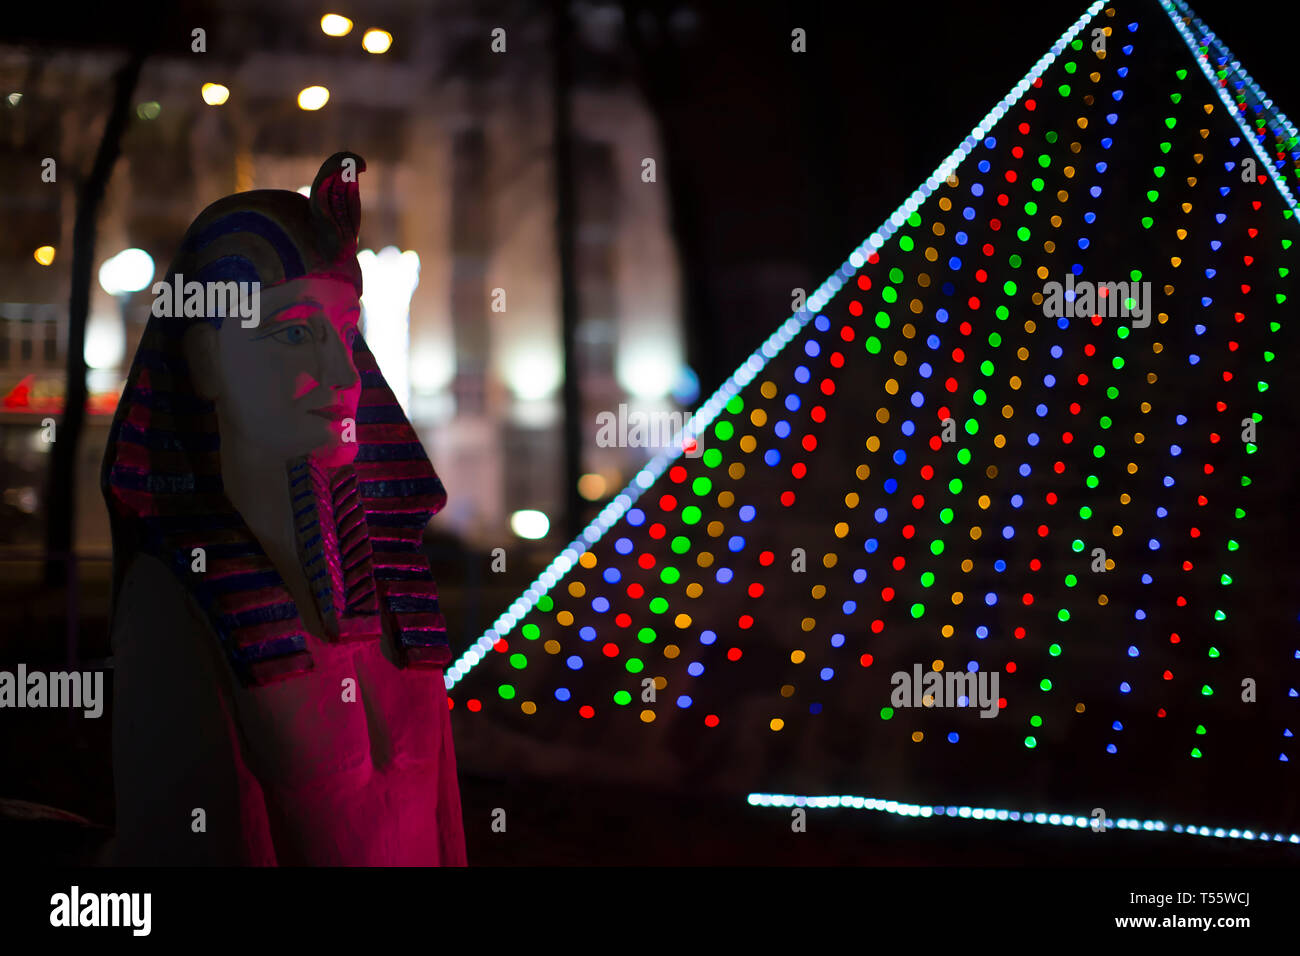 Belarus, Gomel, January 7, 2018. Miniature Egyptian statue of the pharaoh and pyramid of Cheops in New Year's lights Stock Photo